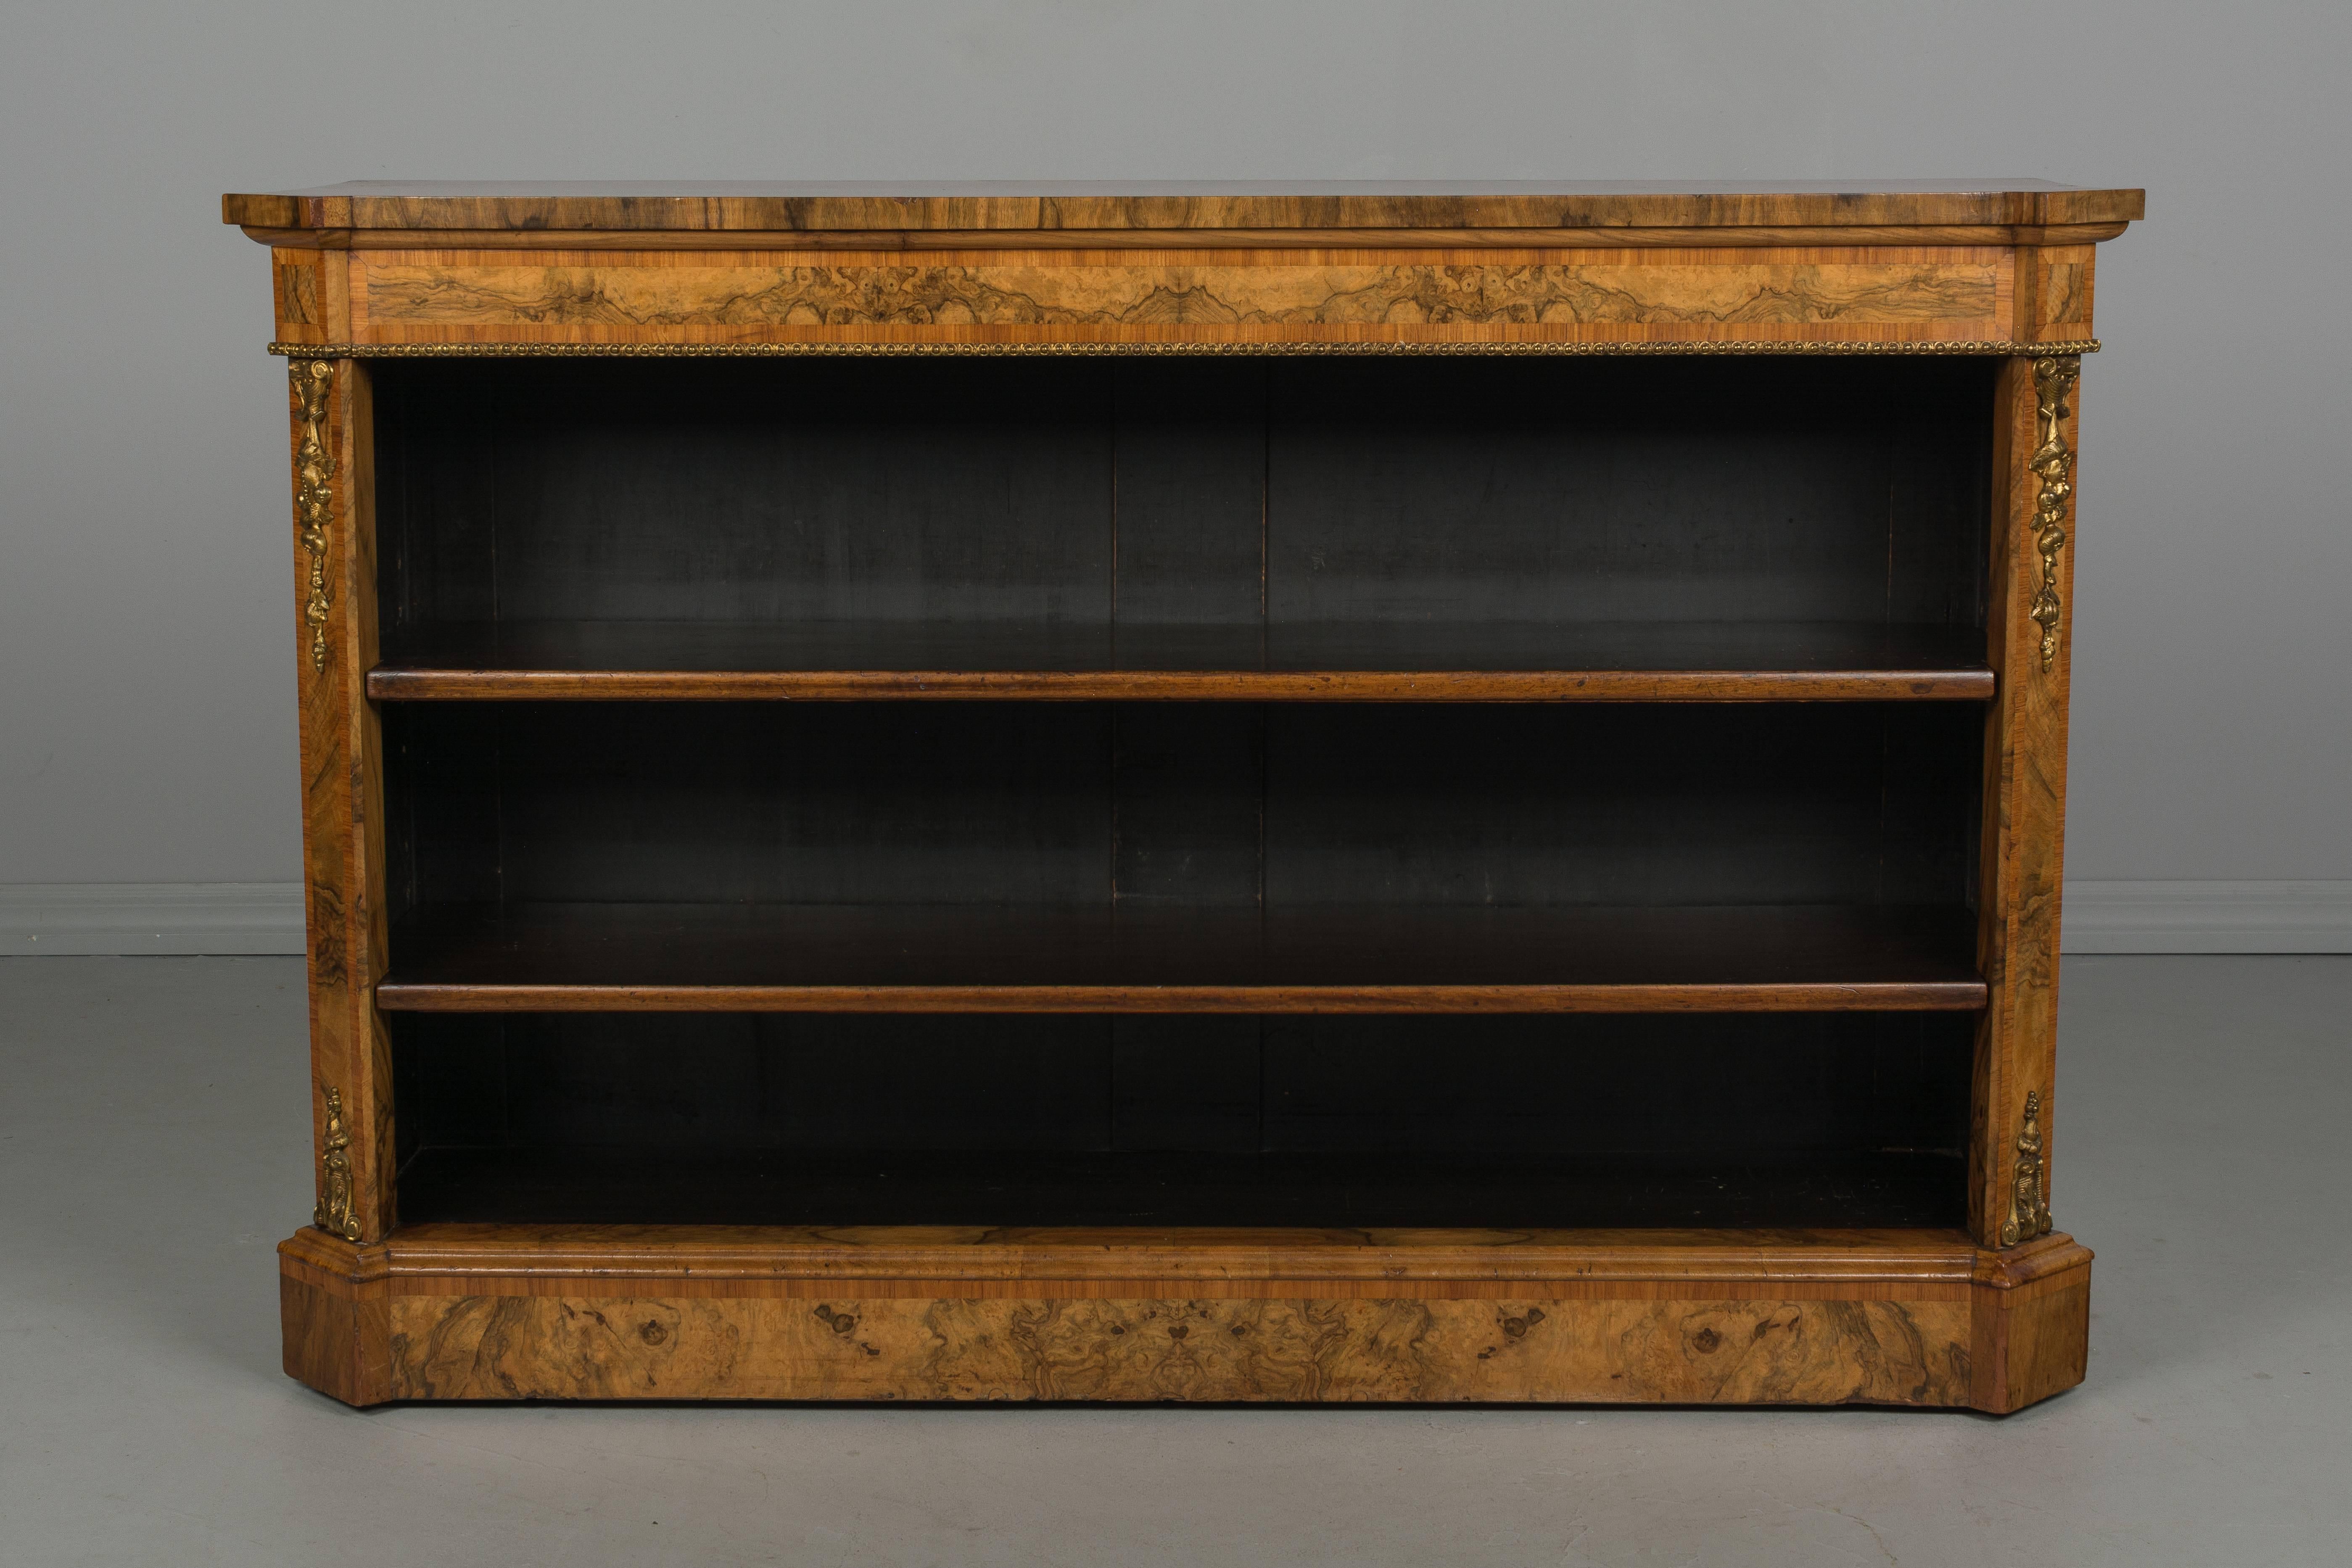 A fine late  19th century French Restauration style bookcase made of bookmatched veneer of burled walnut with bronze corner decorations and trim. Dark stained interior with two adjustable shelves, 11